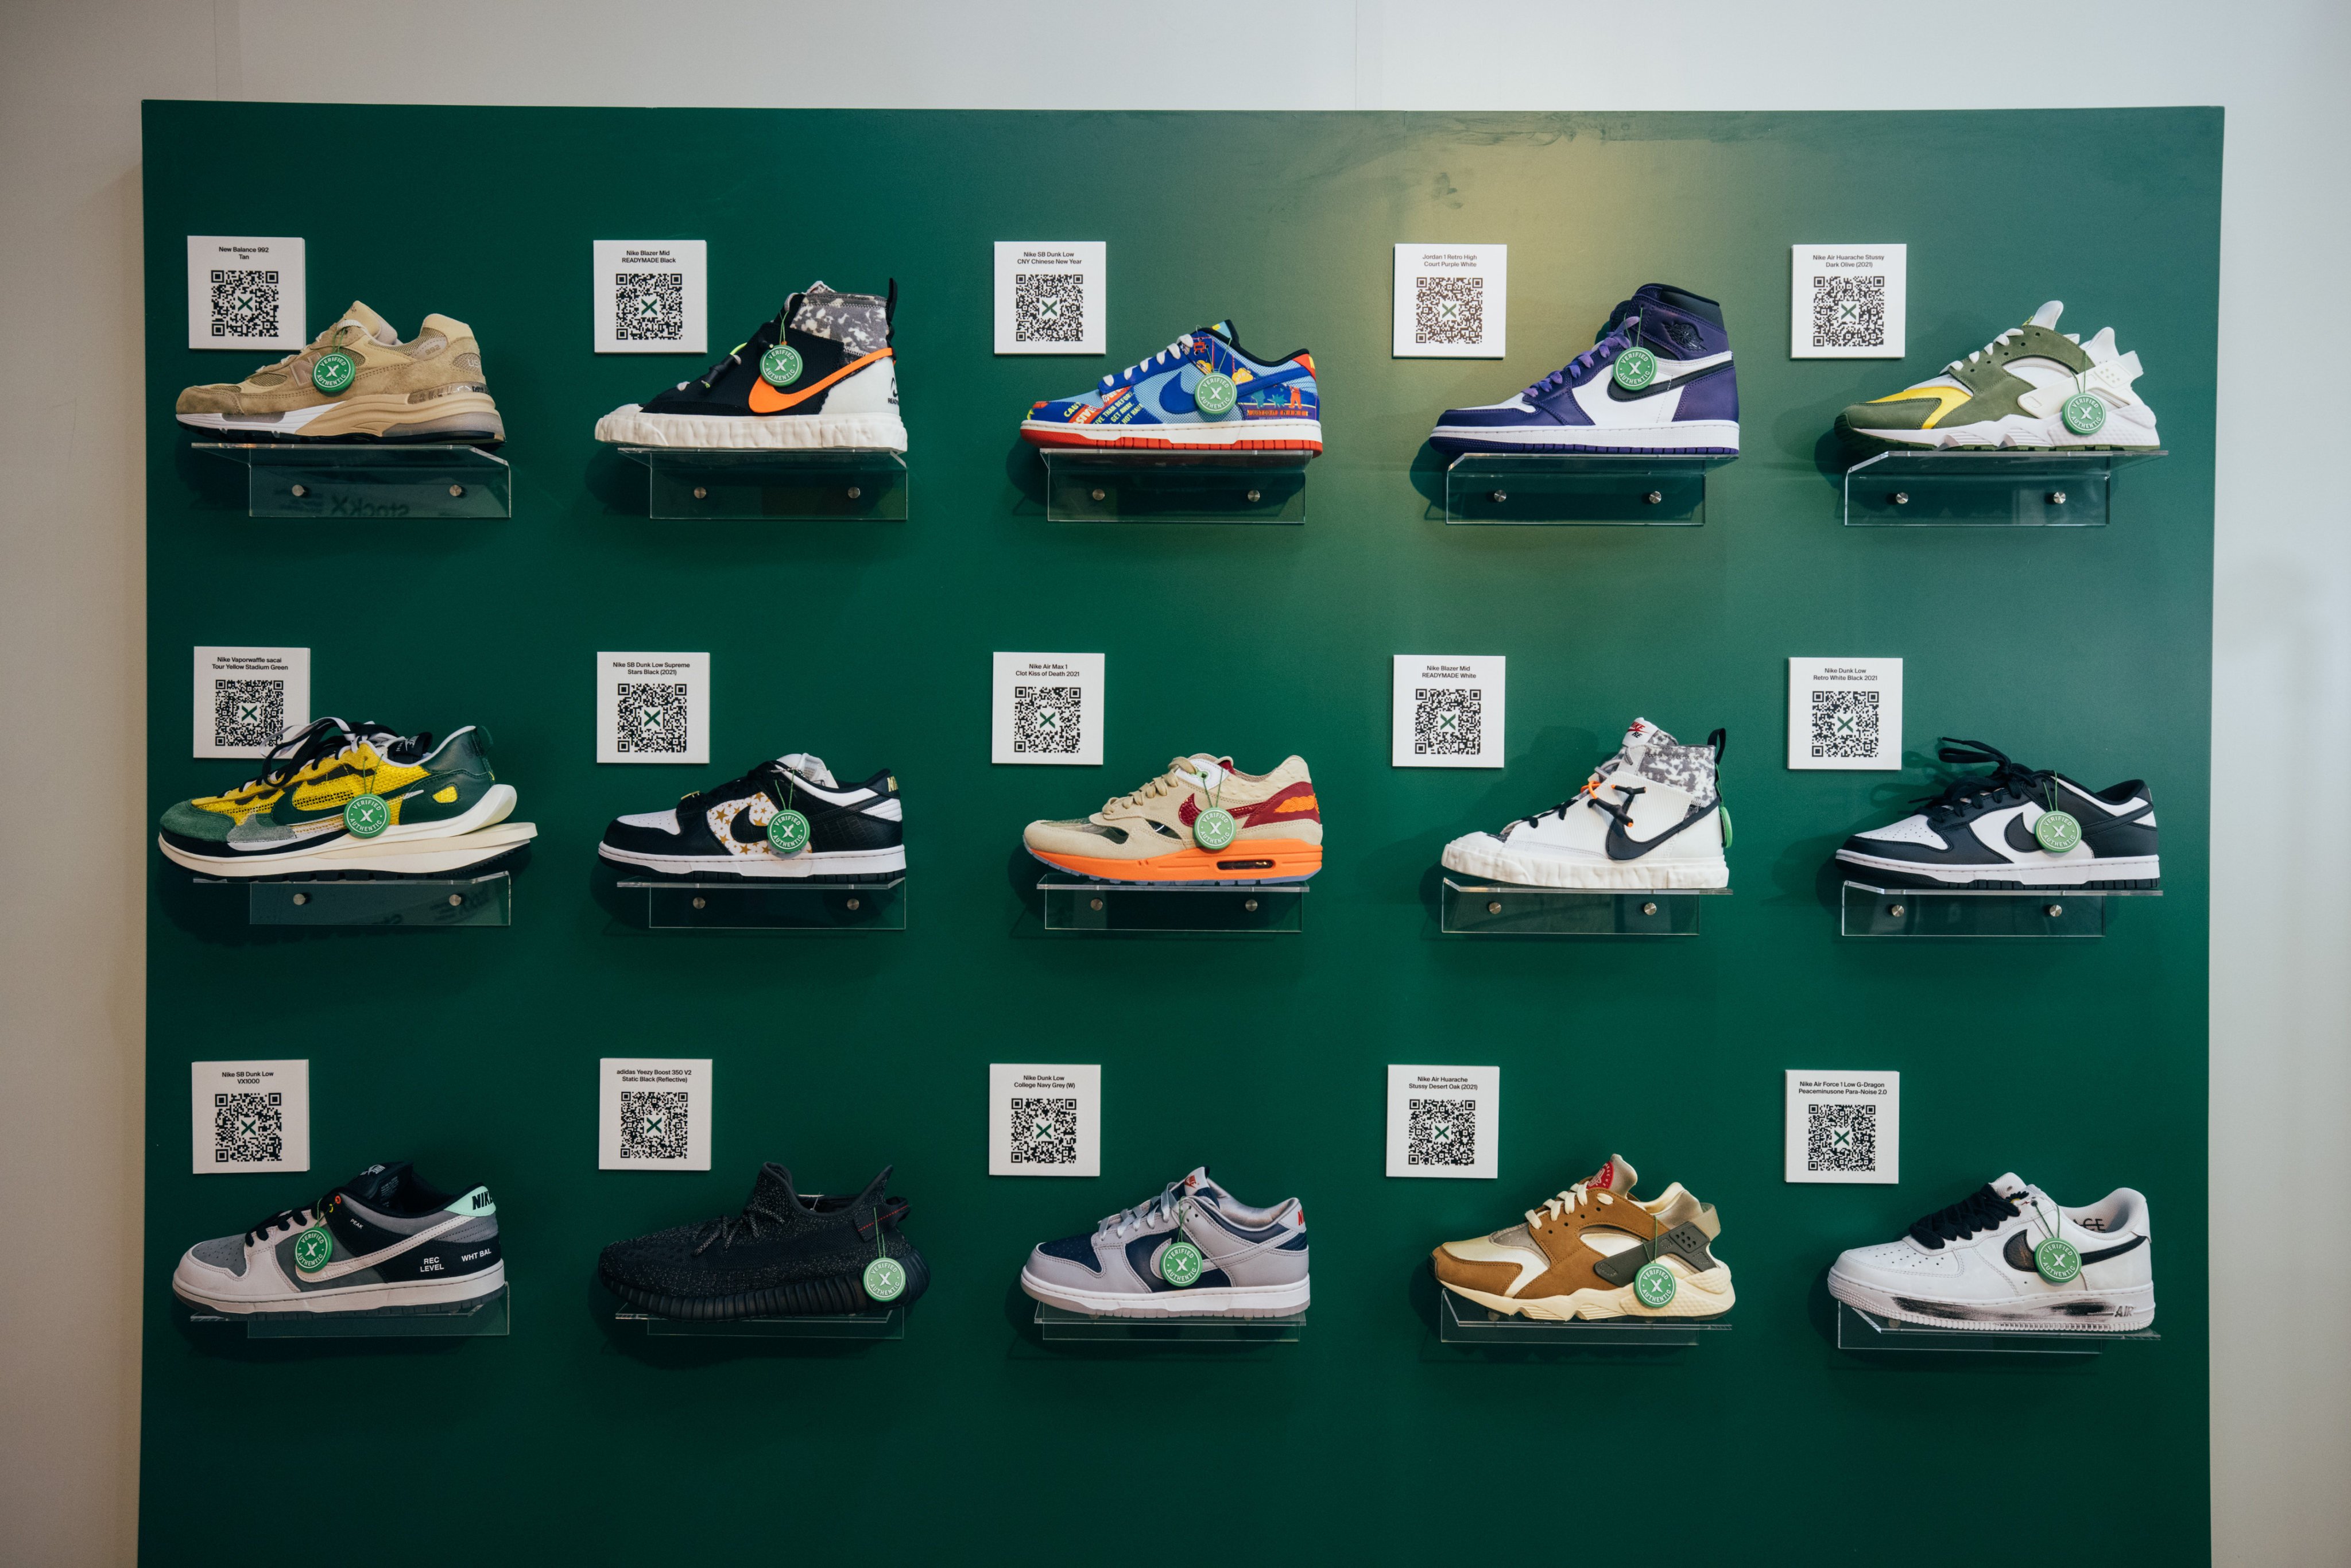 Check Out Eminem's Sneaker Collection! - Sneaker Freaker